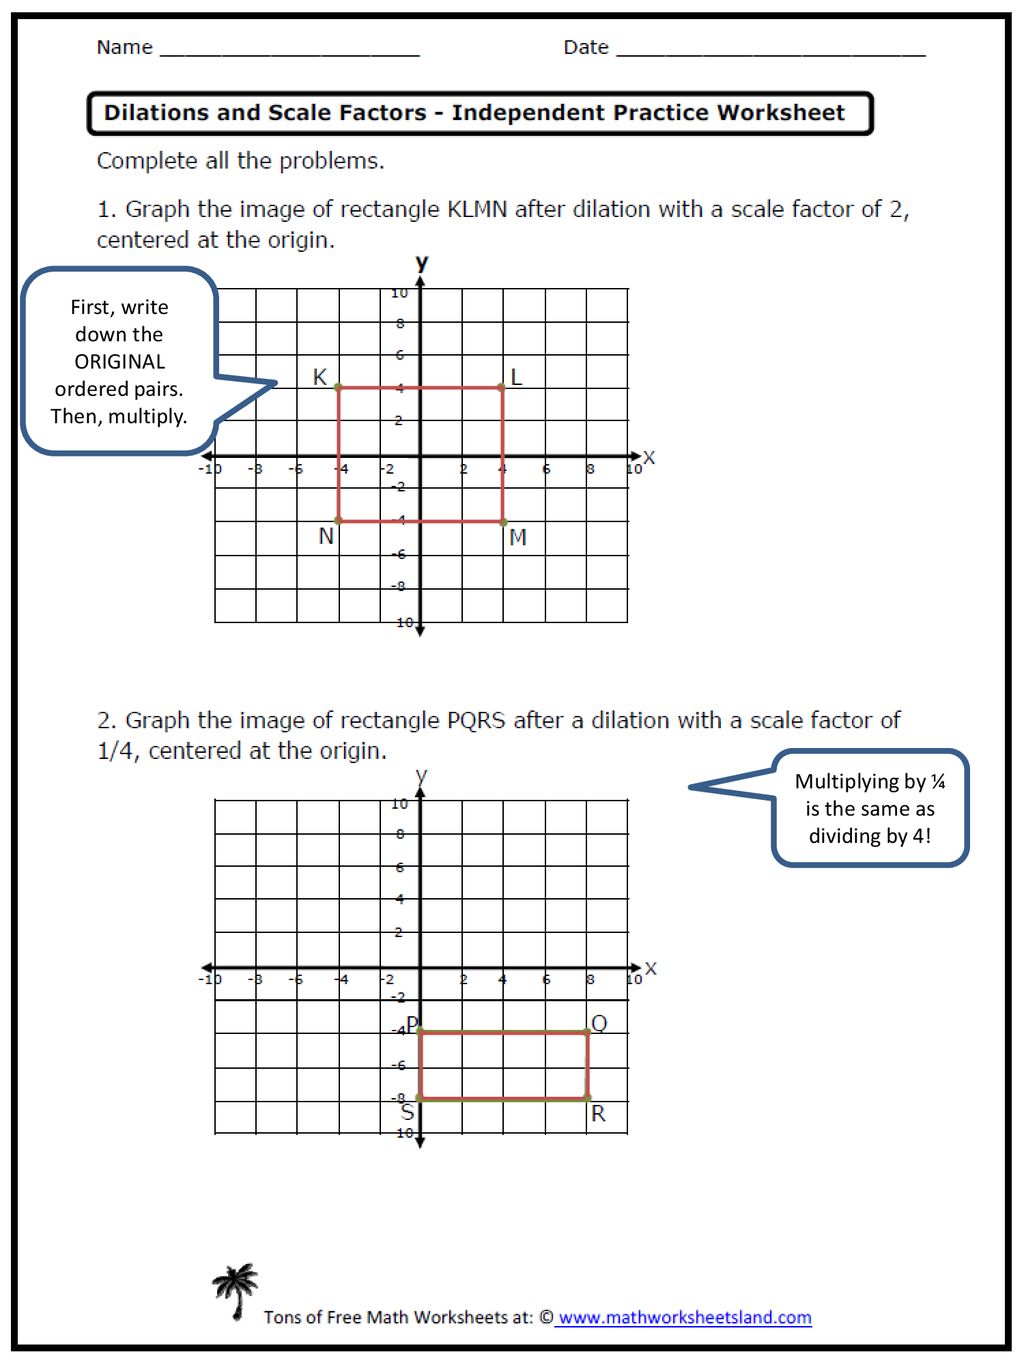 Dilations And Scale Factors Independent Practice Worksheet Intended For Dilations And Scale Factor Worksheet